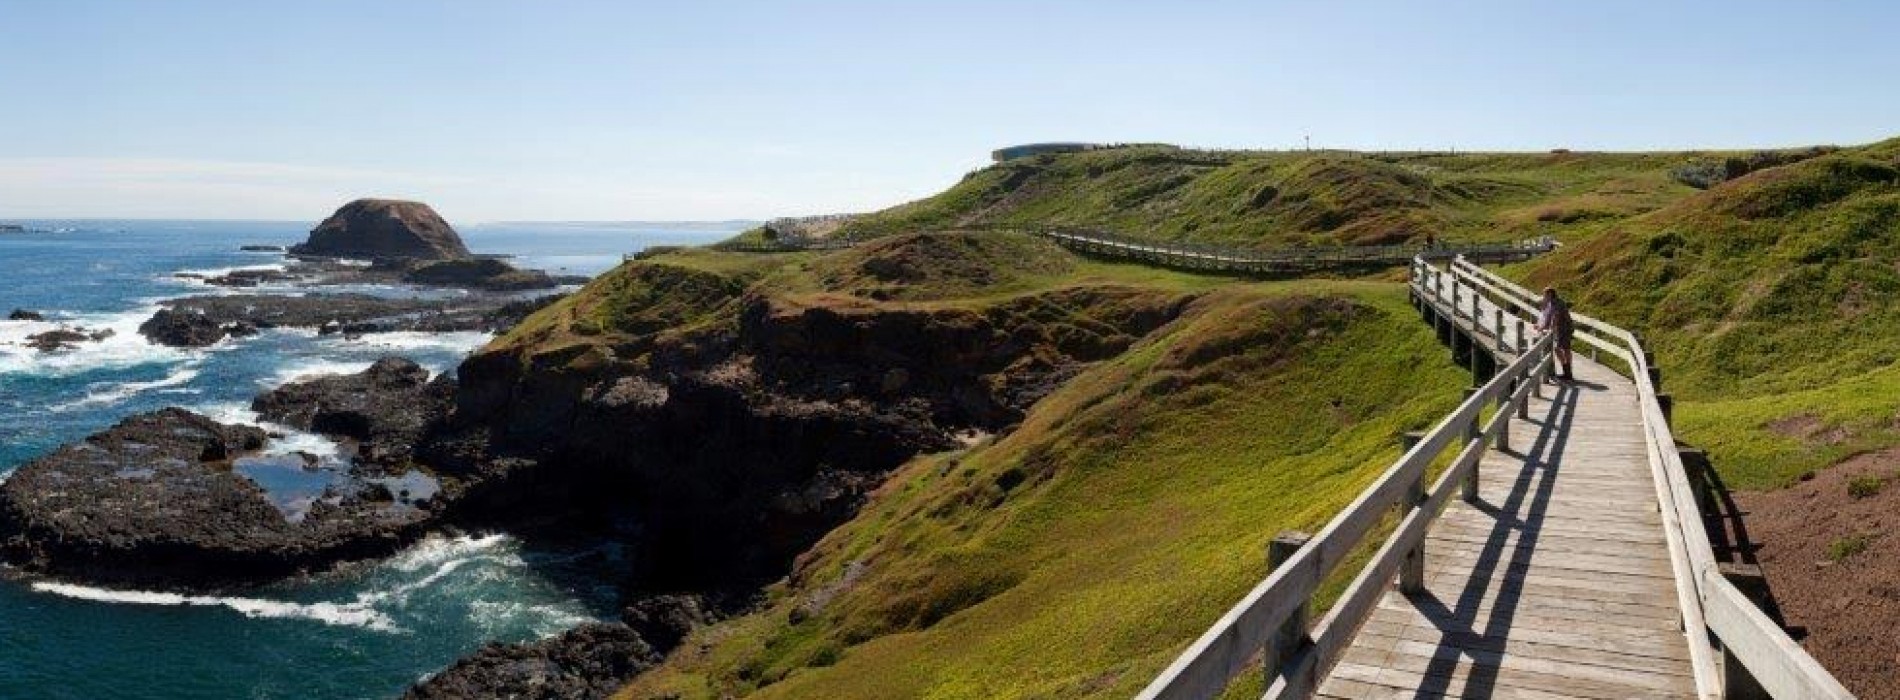 Top 8 reasons to visit Phillip Island